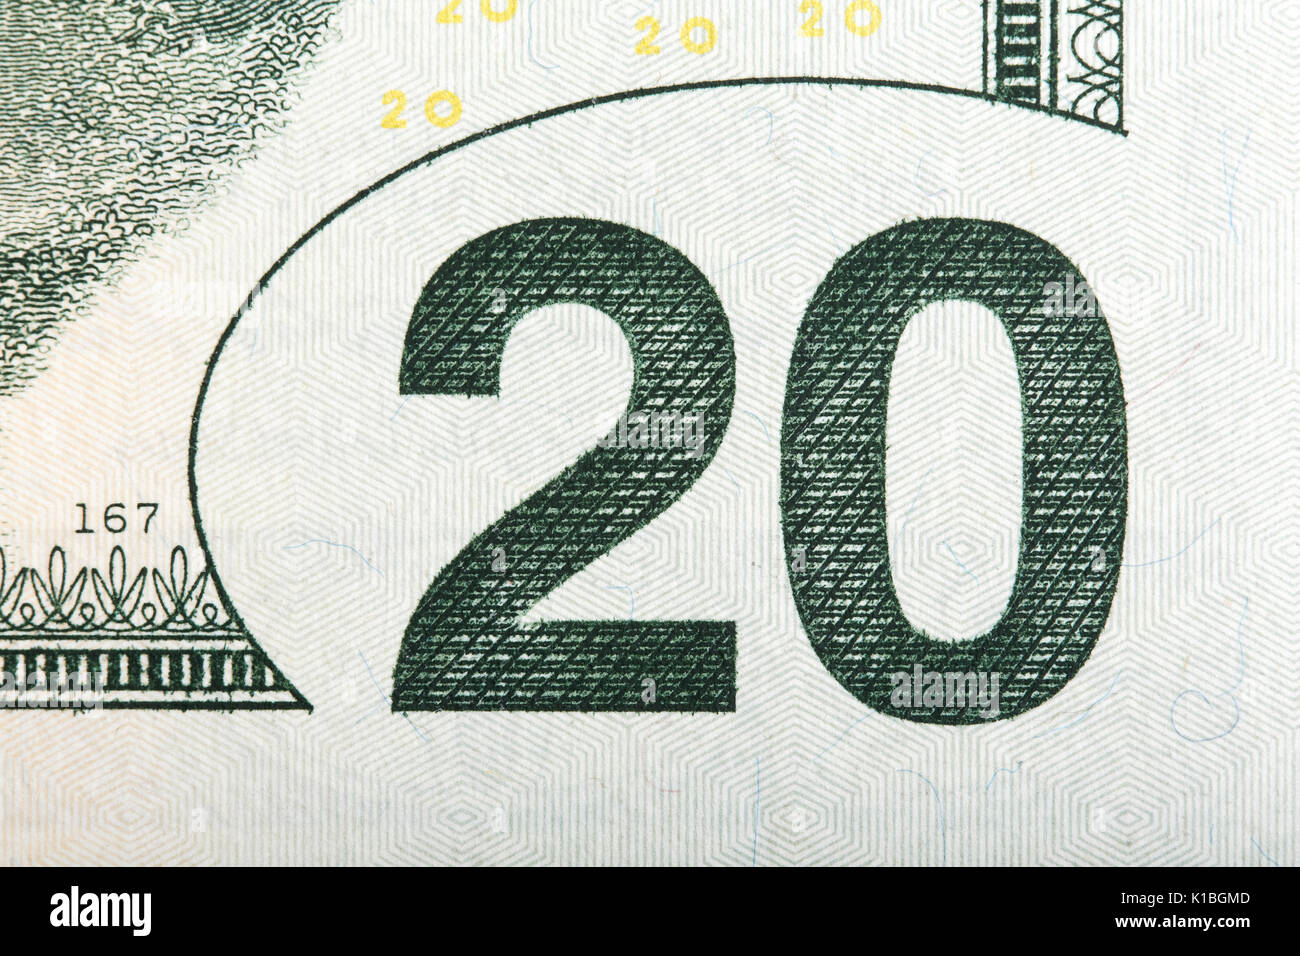 Macro of the value on a U.S. 20 bill, extreme macro. High resolution photo. Stock Photo